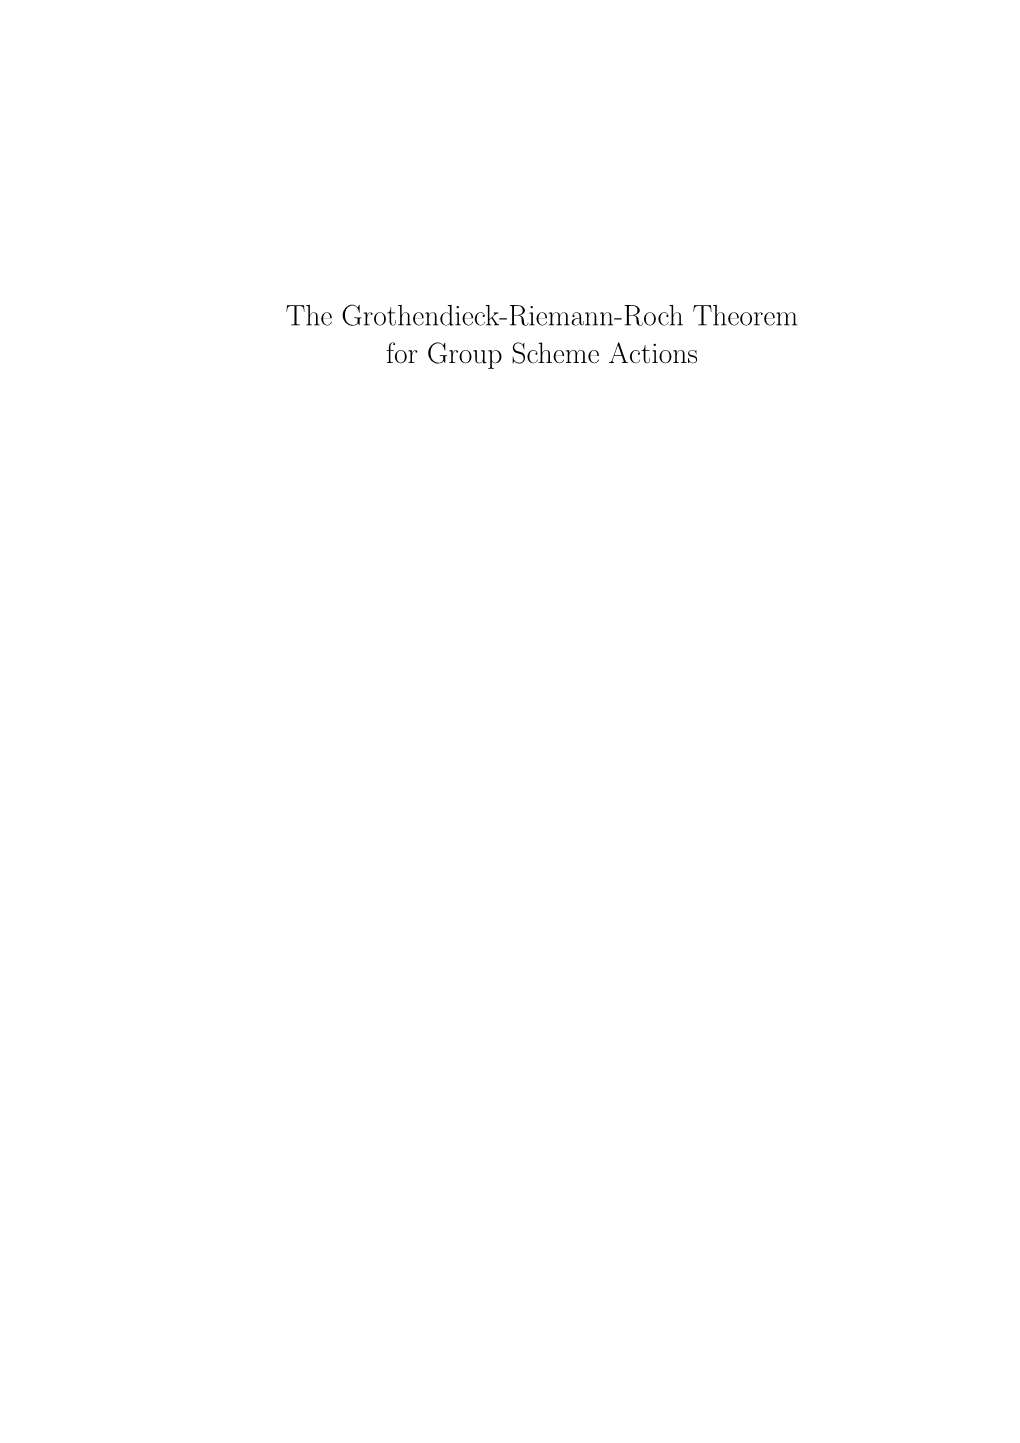 The Grothendieck-Riemann-Roch Theorem for Group Scheme Actions